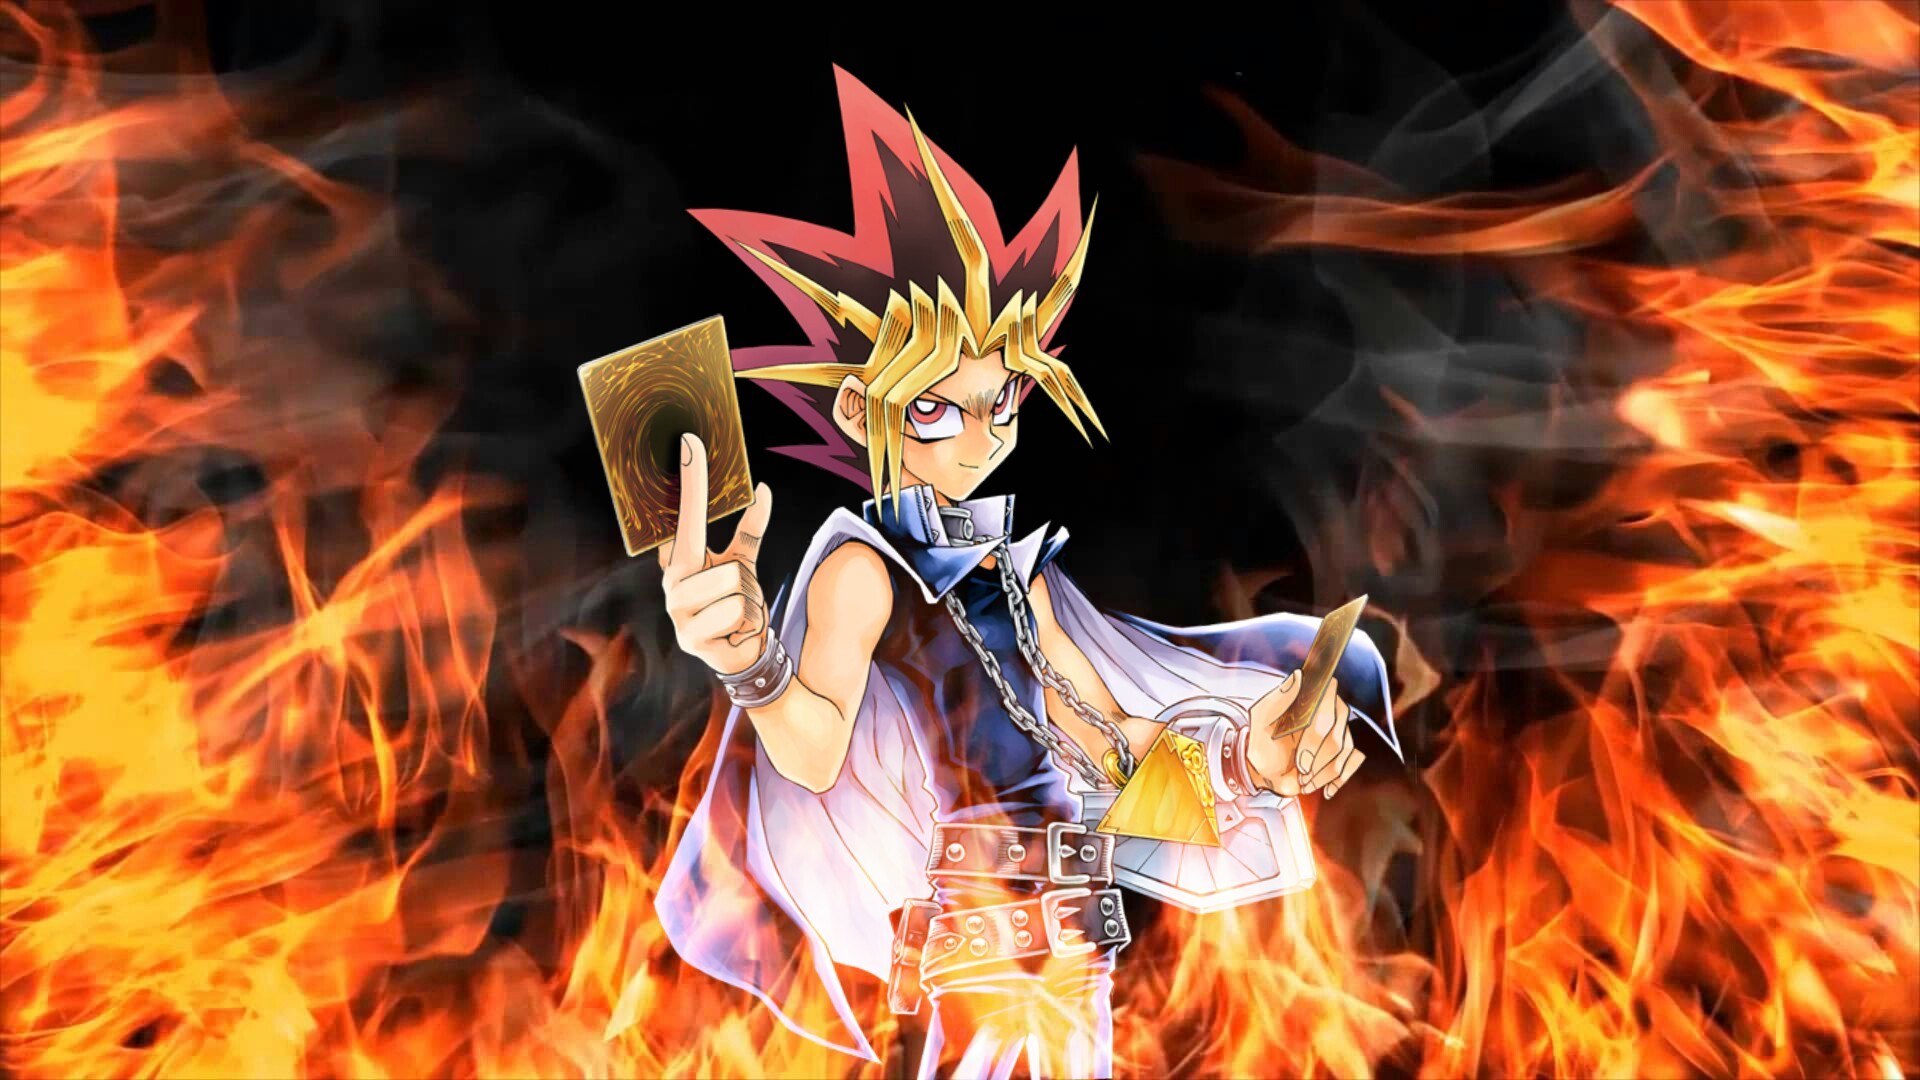 yugioh legacy of the duelist link evolution xbox one release date